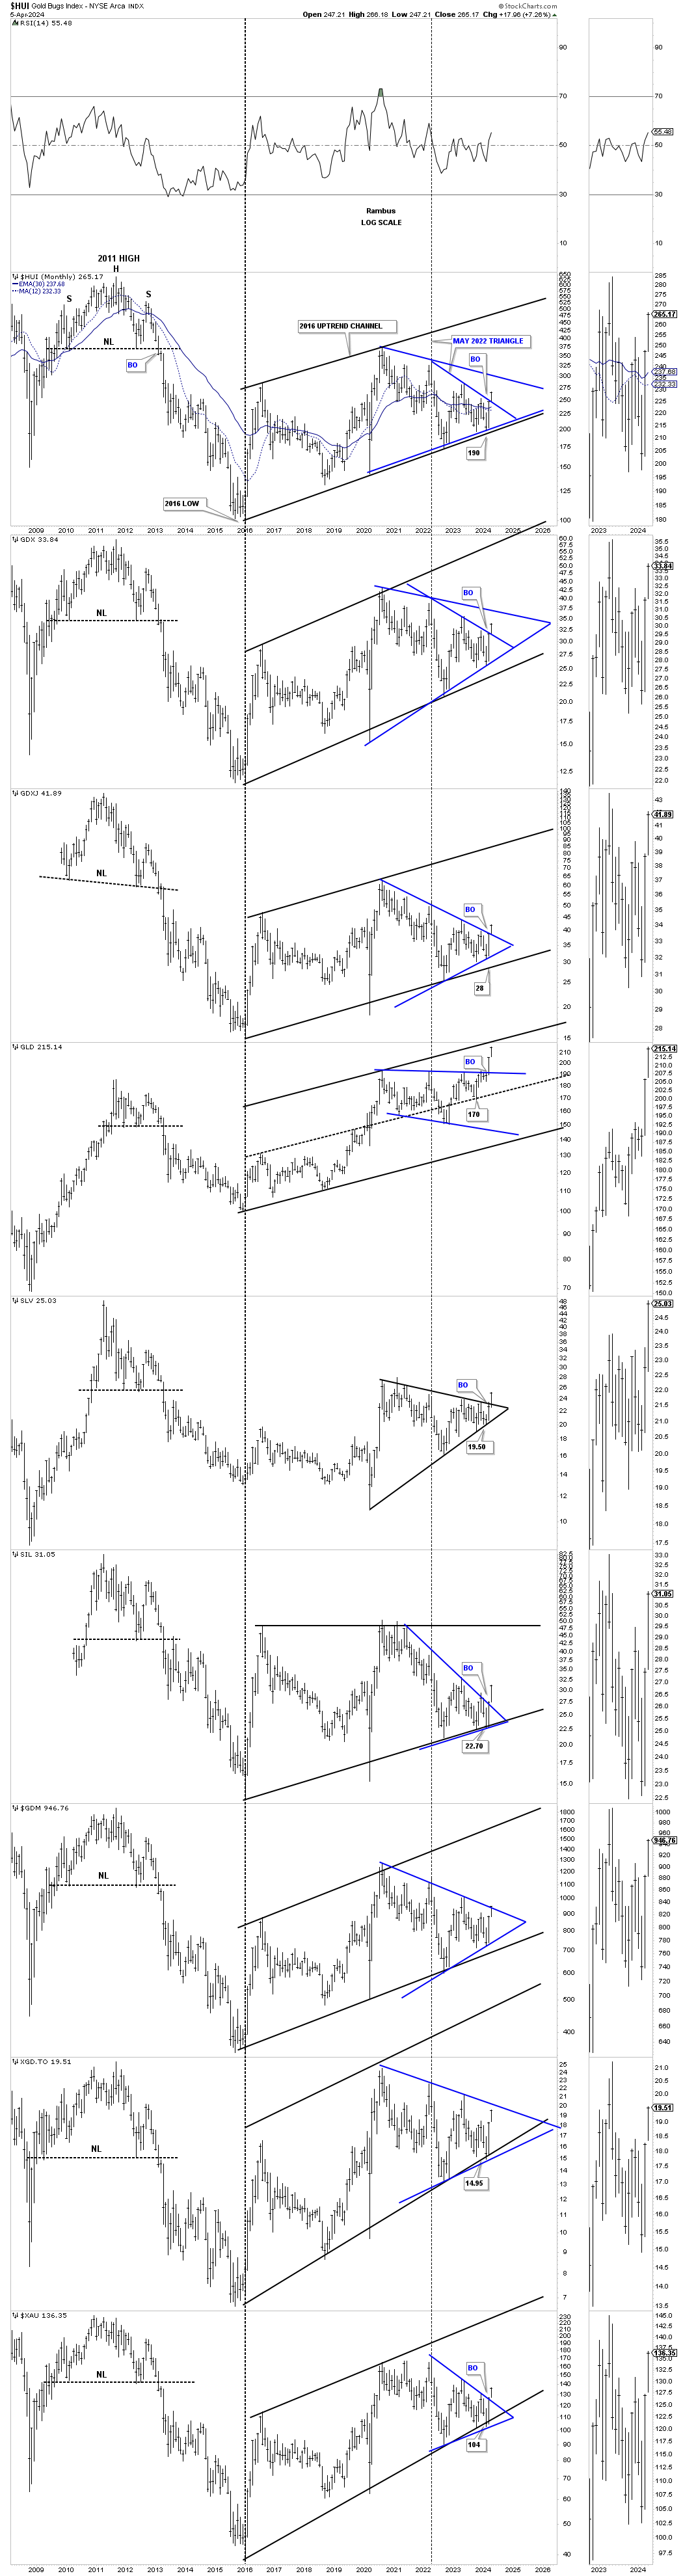 HUI Monthly Chart